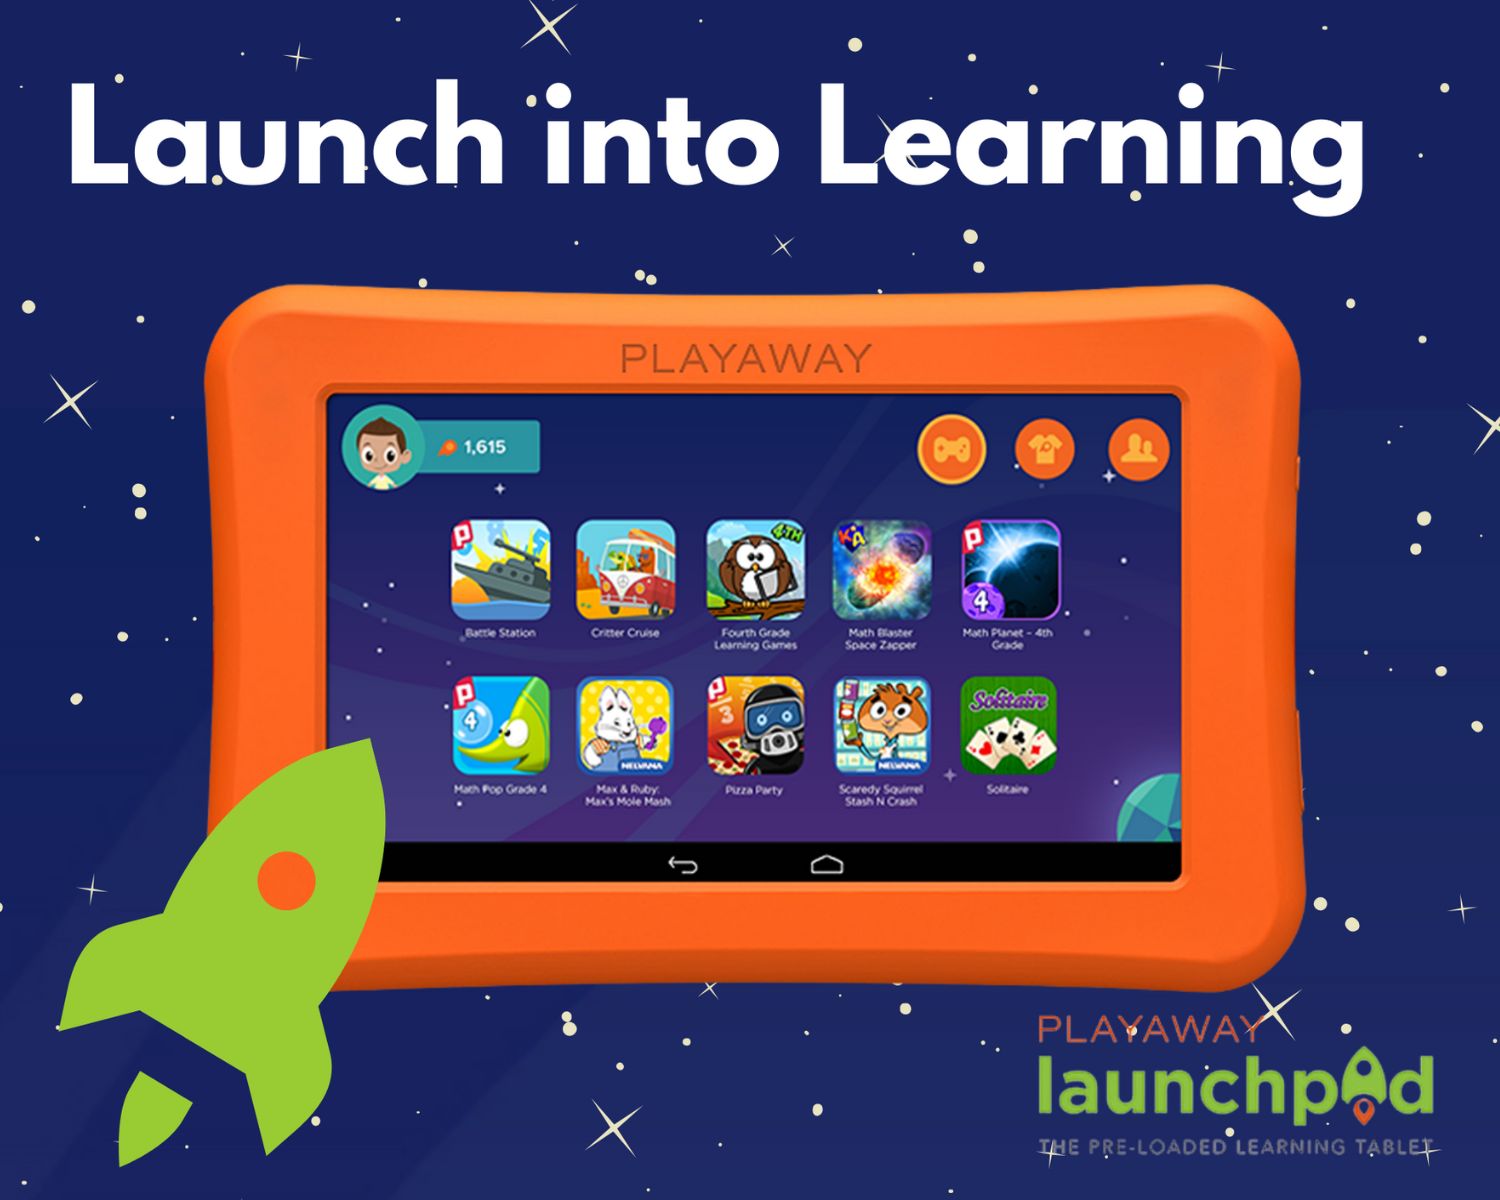 An orange playaway launchpad with a green spaceship in front on a navy background with stars